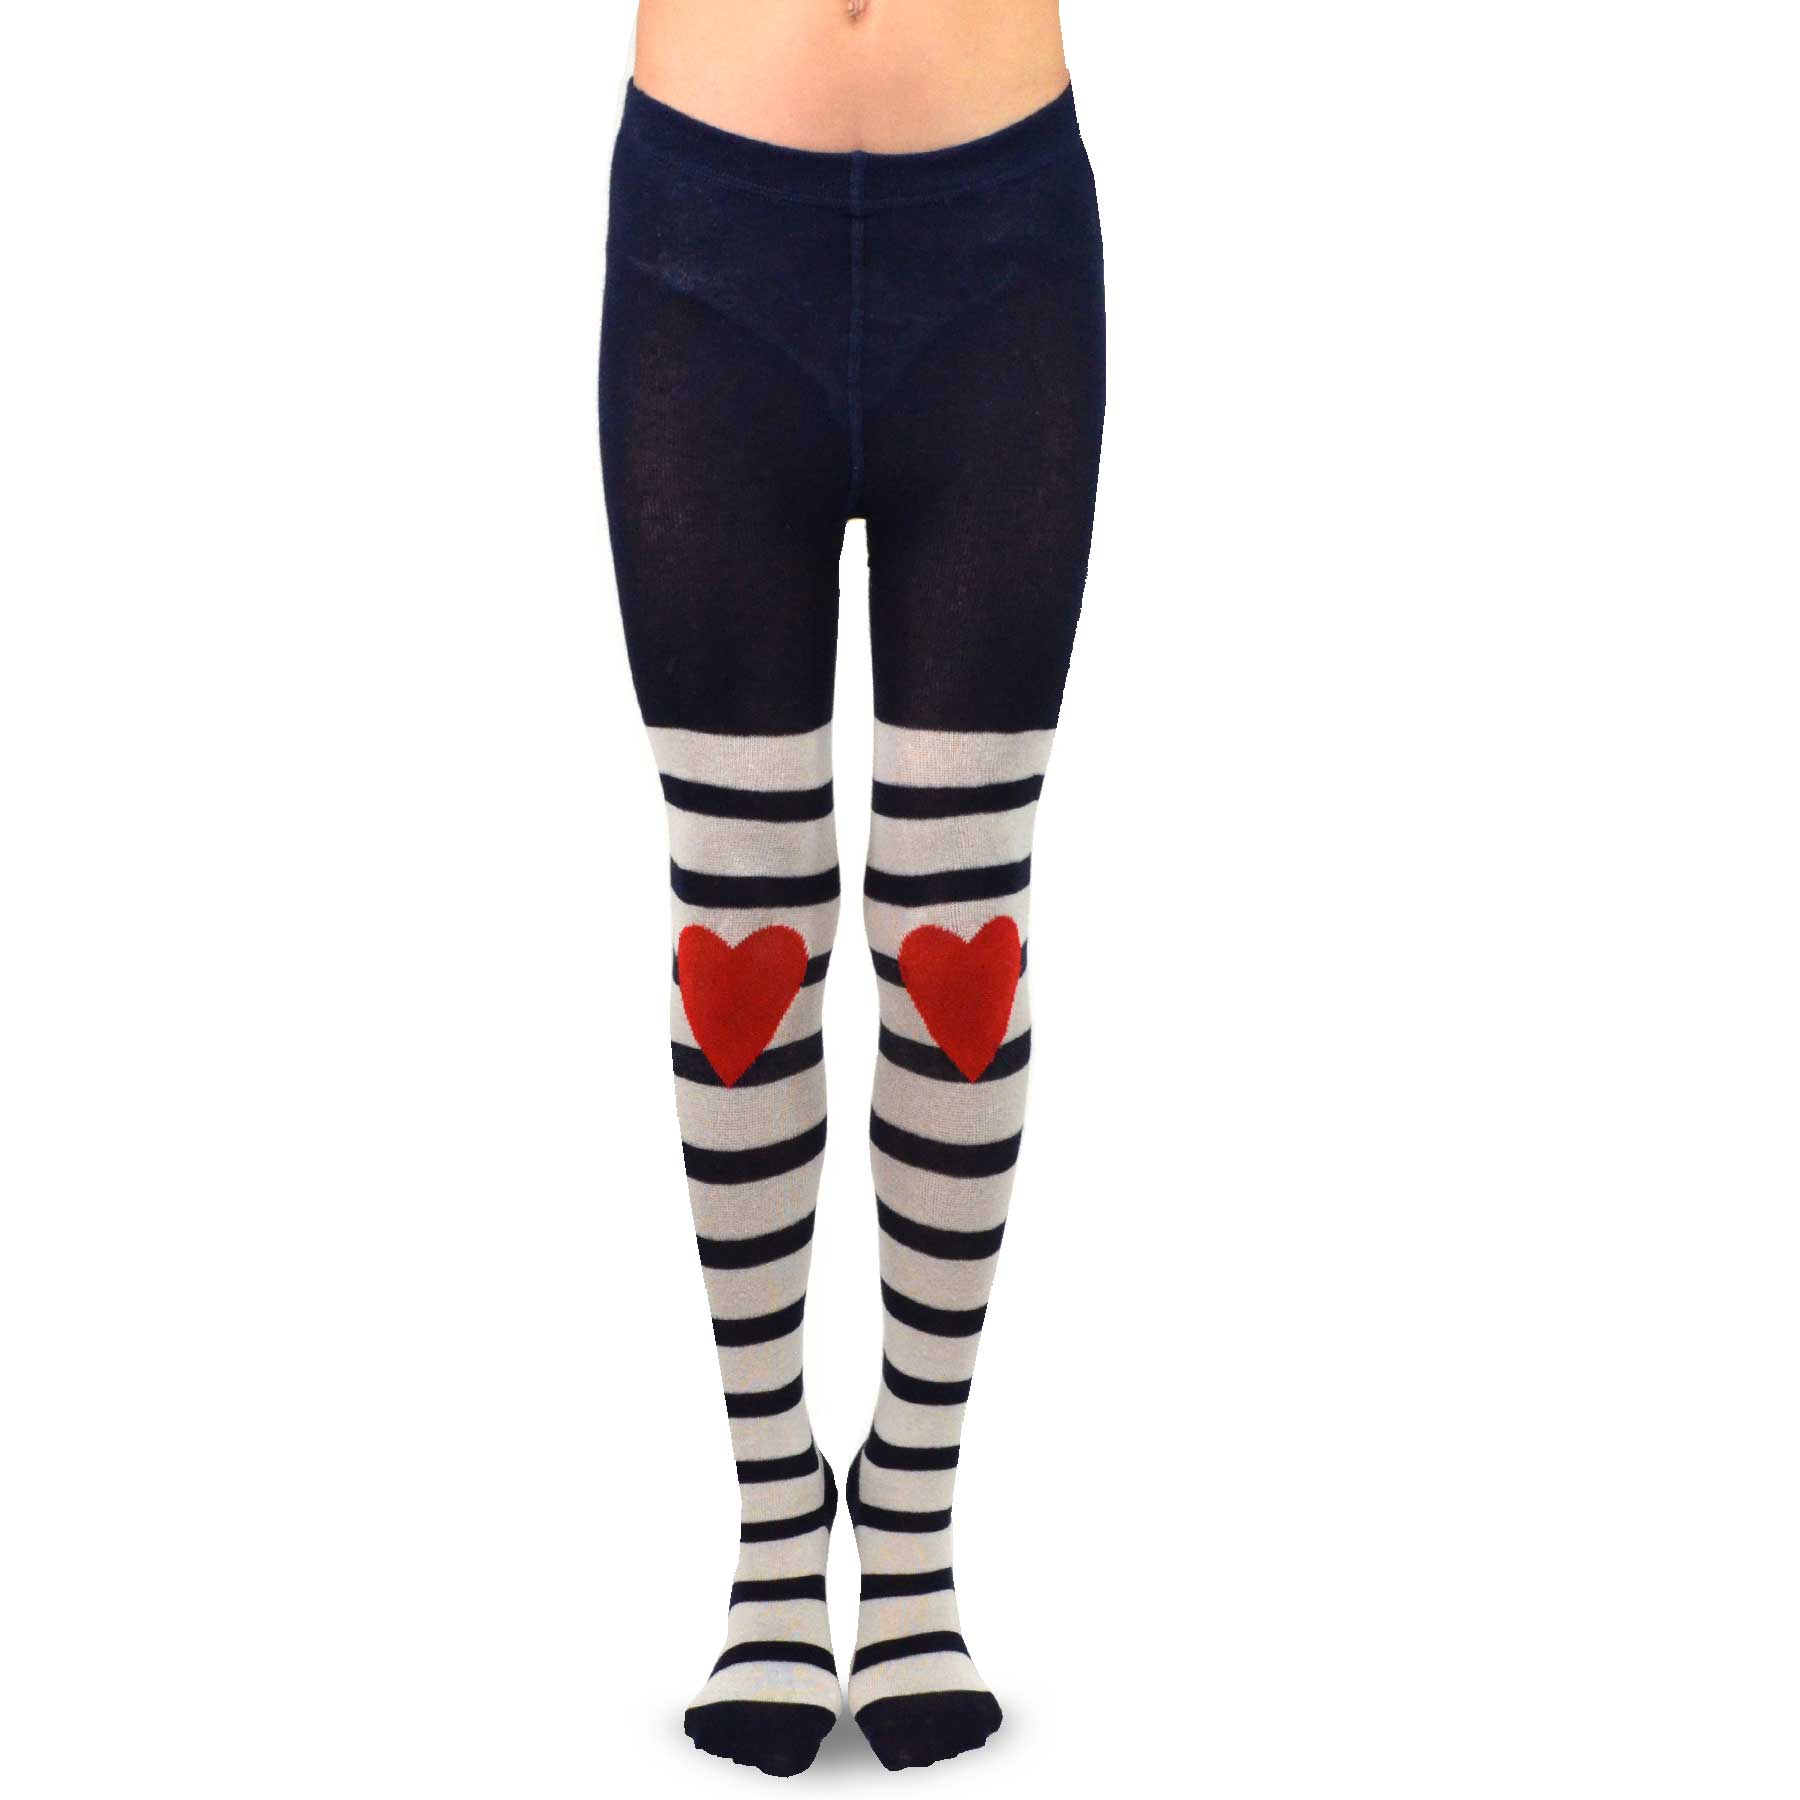 TeeHee Socks Kid's Casual Cotton Footless Tights Stripes with Hearts 3